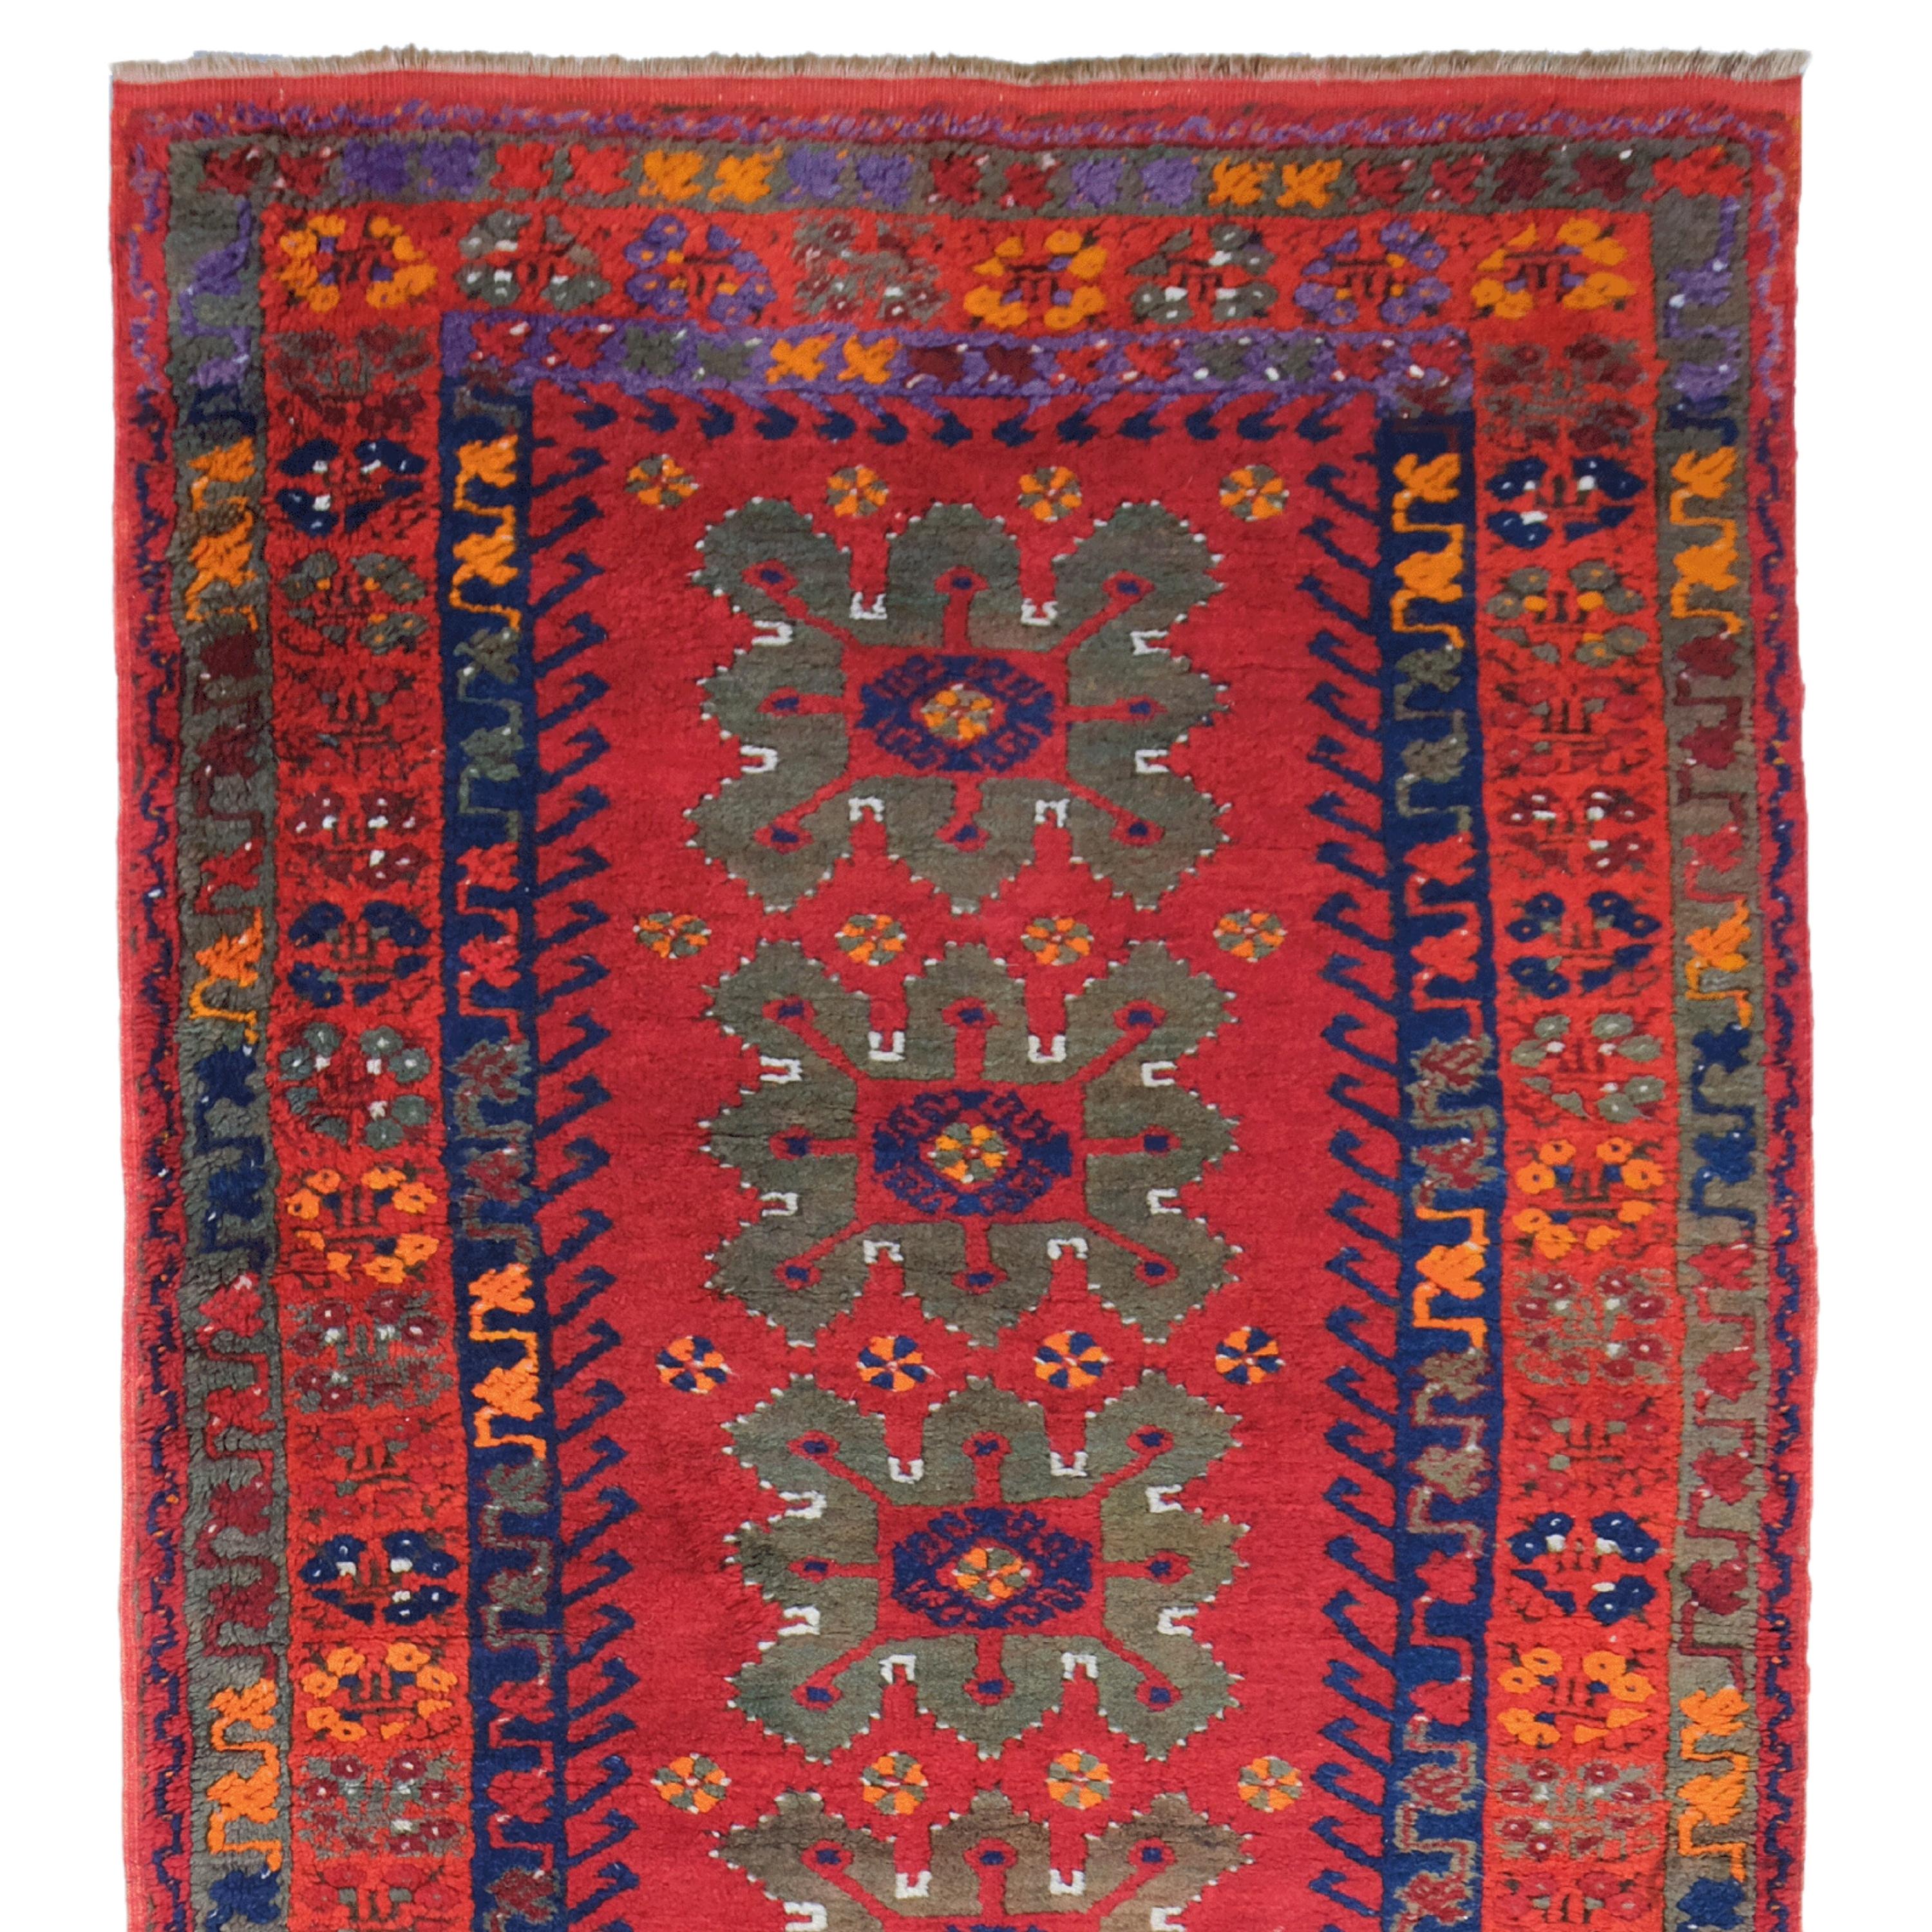 Colors and Patterns: The runner is decorated with complex geometric patterns and motifs in rich red, blue and yellow colors.
The central part is filled with symmetrical designs in lighter tones, surrounded by darker tones.
Edges: The numerous edges